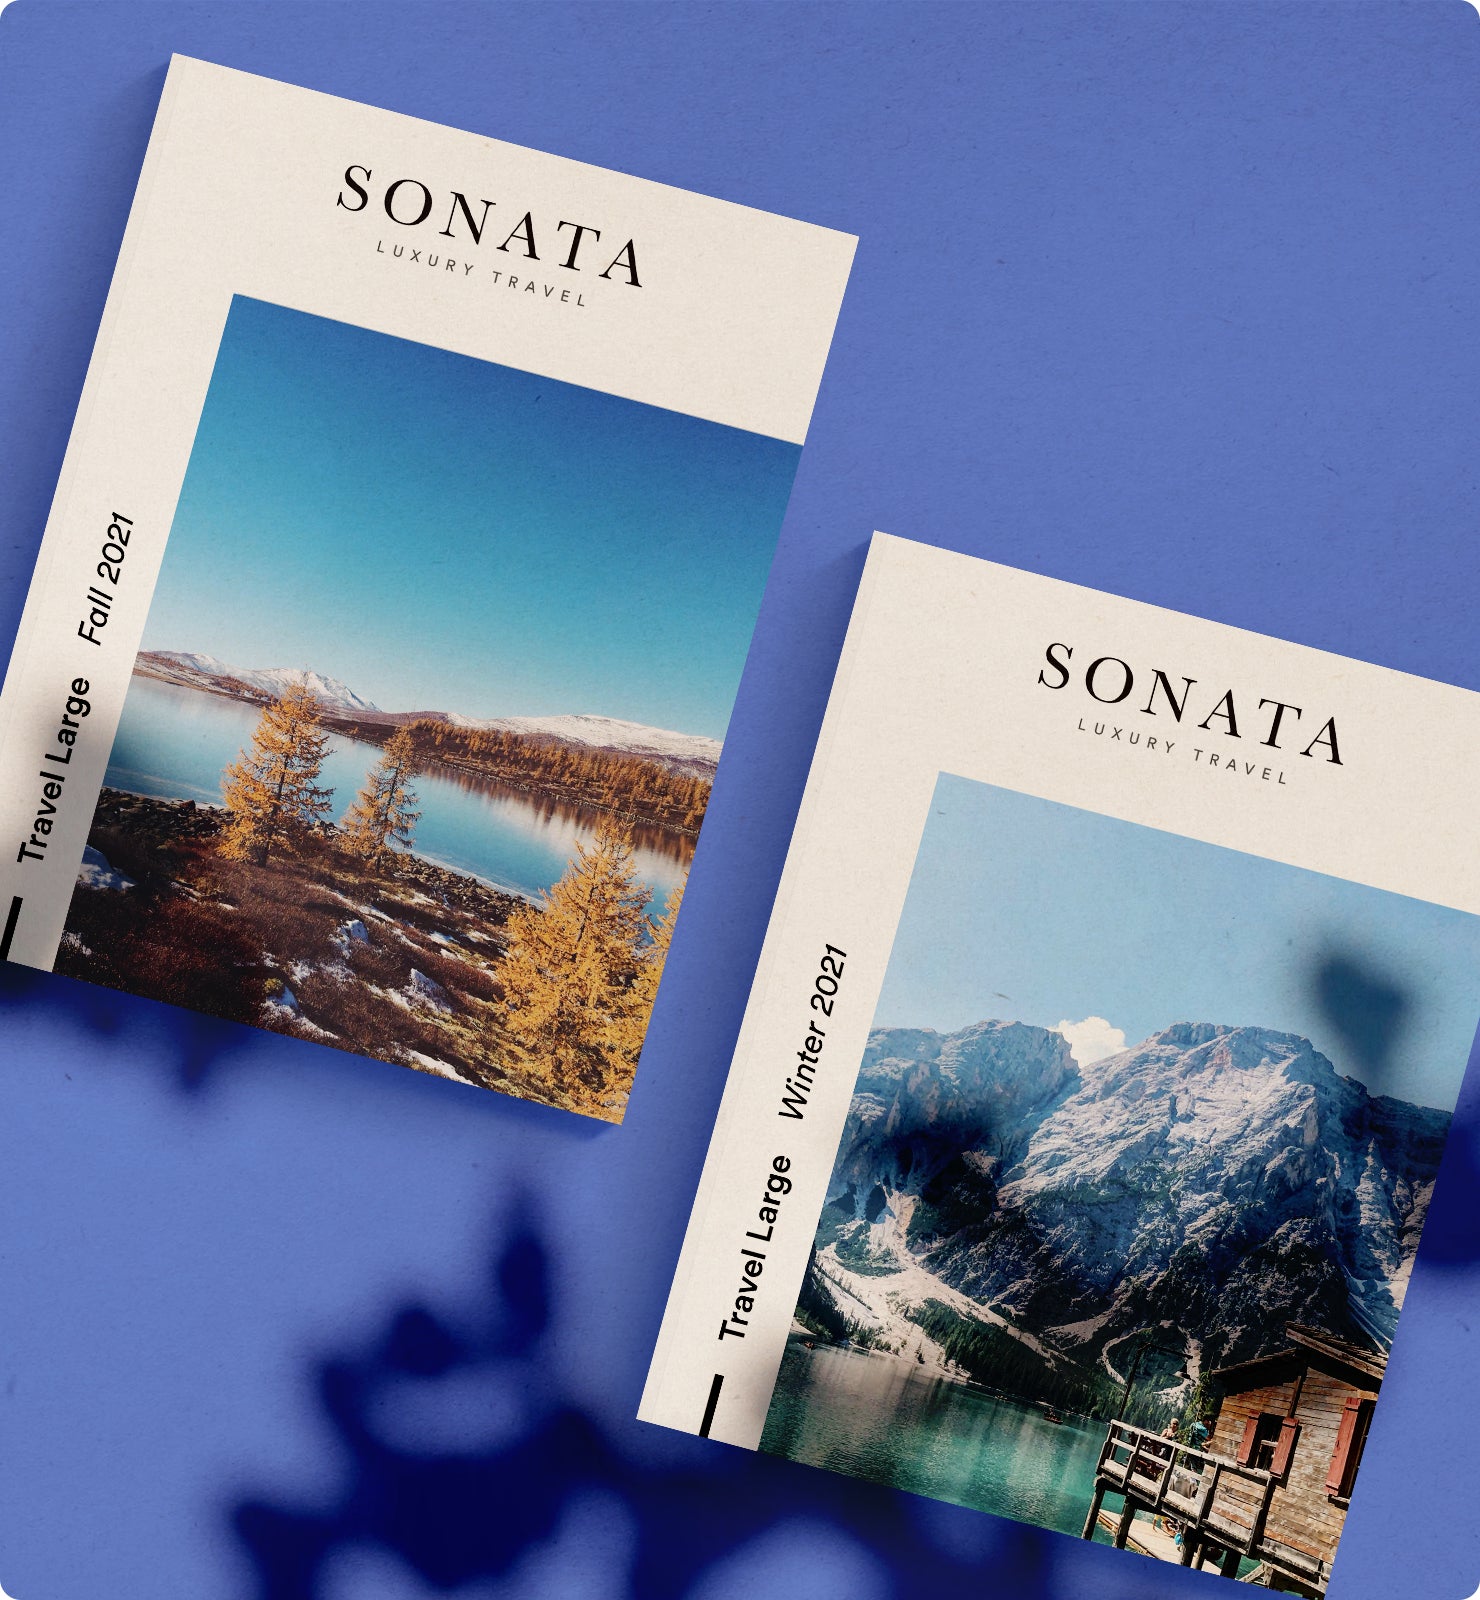 two Sonata Luxury Travel printed catalogs with outdoor scenes on the covers